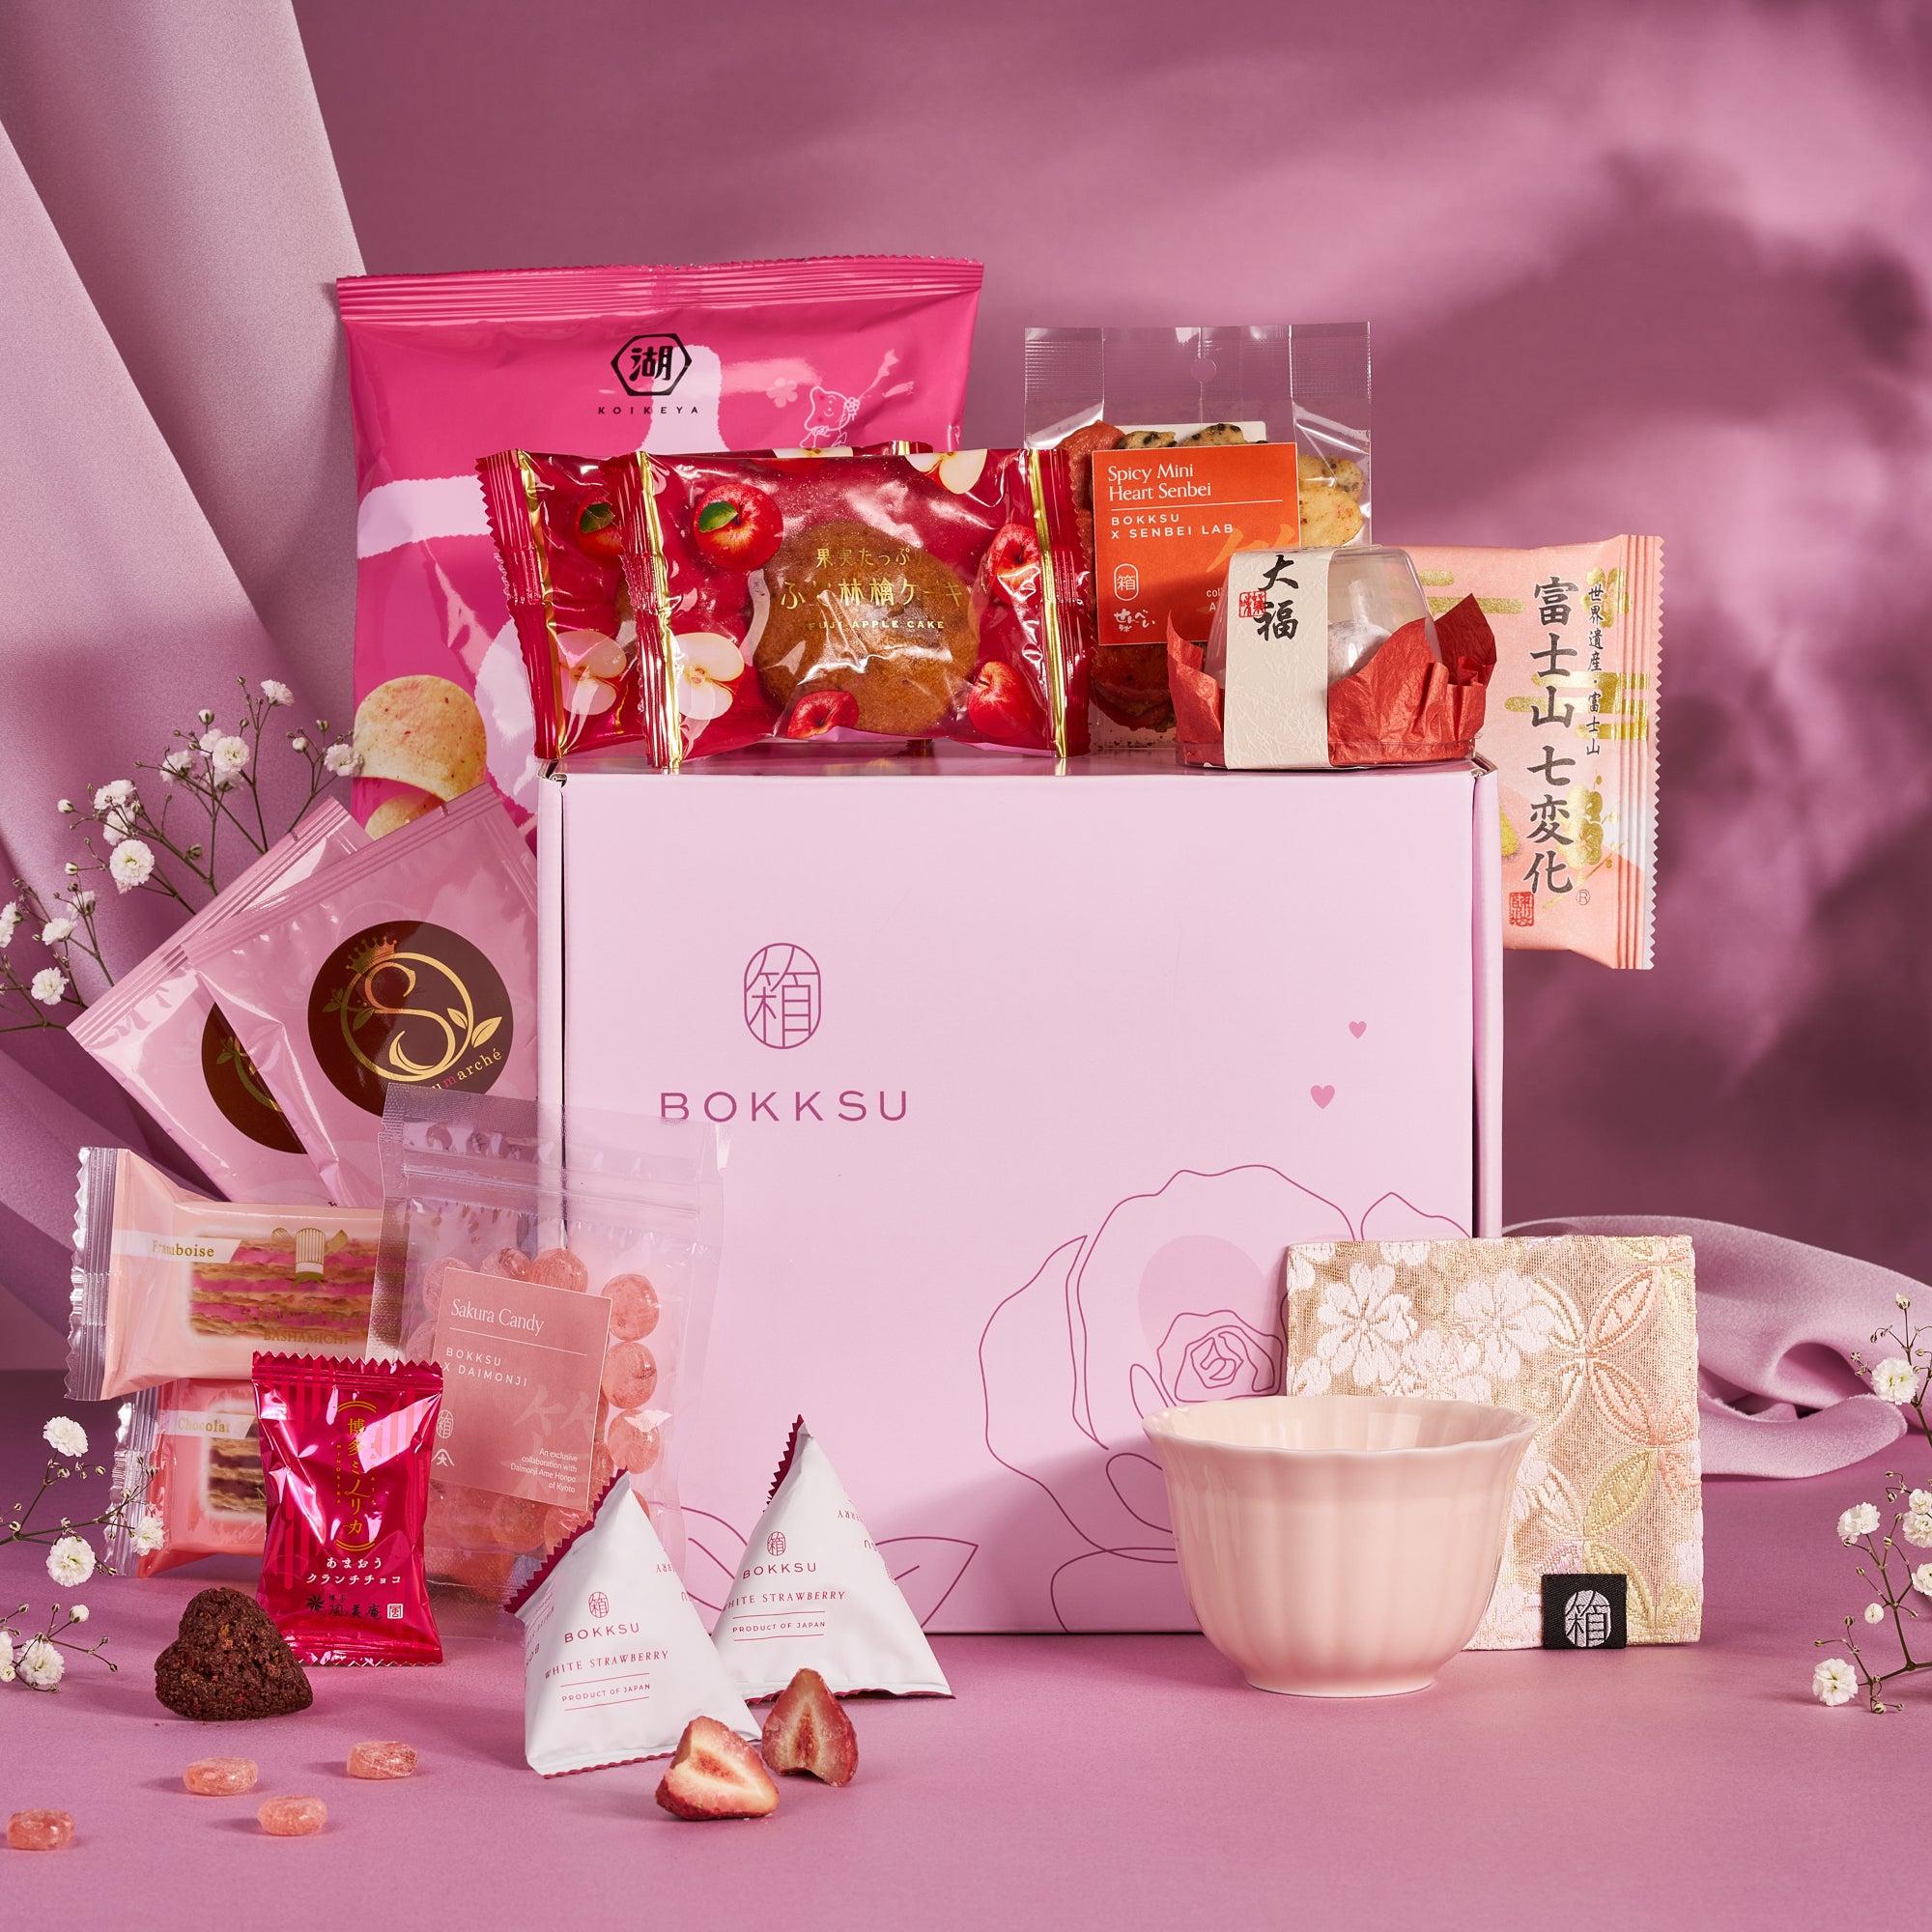 Pamper Her Gift Box - $118 - $180 — Passionflowers Herbology